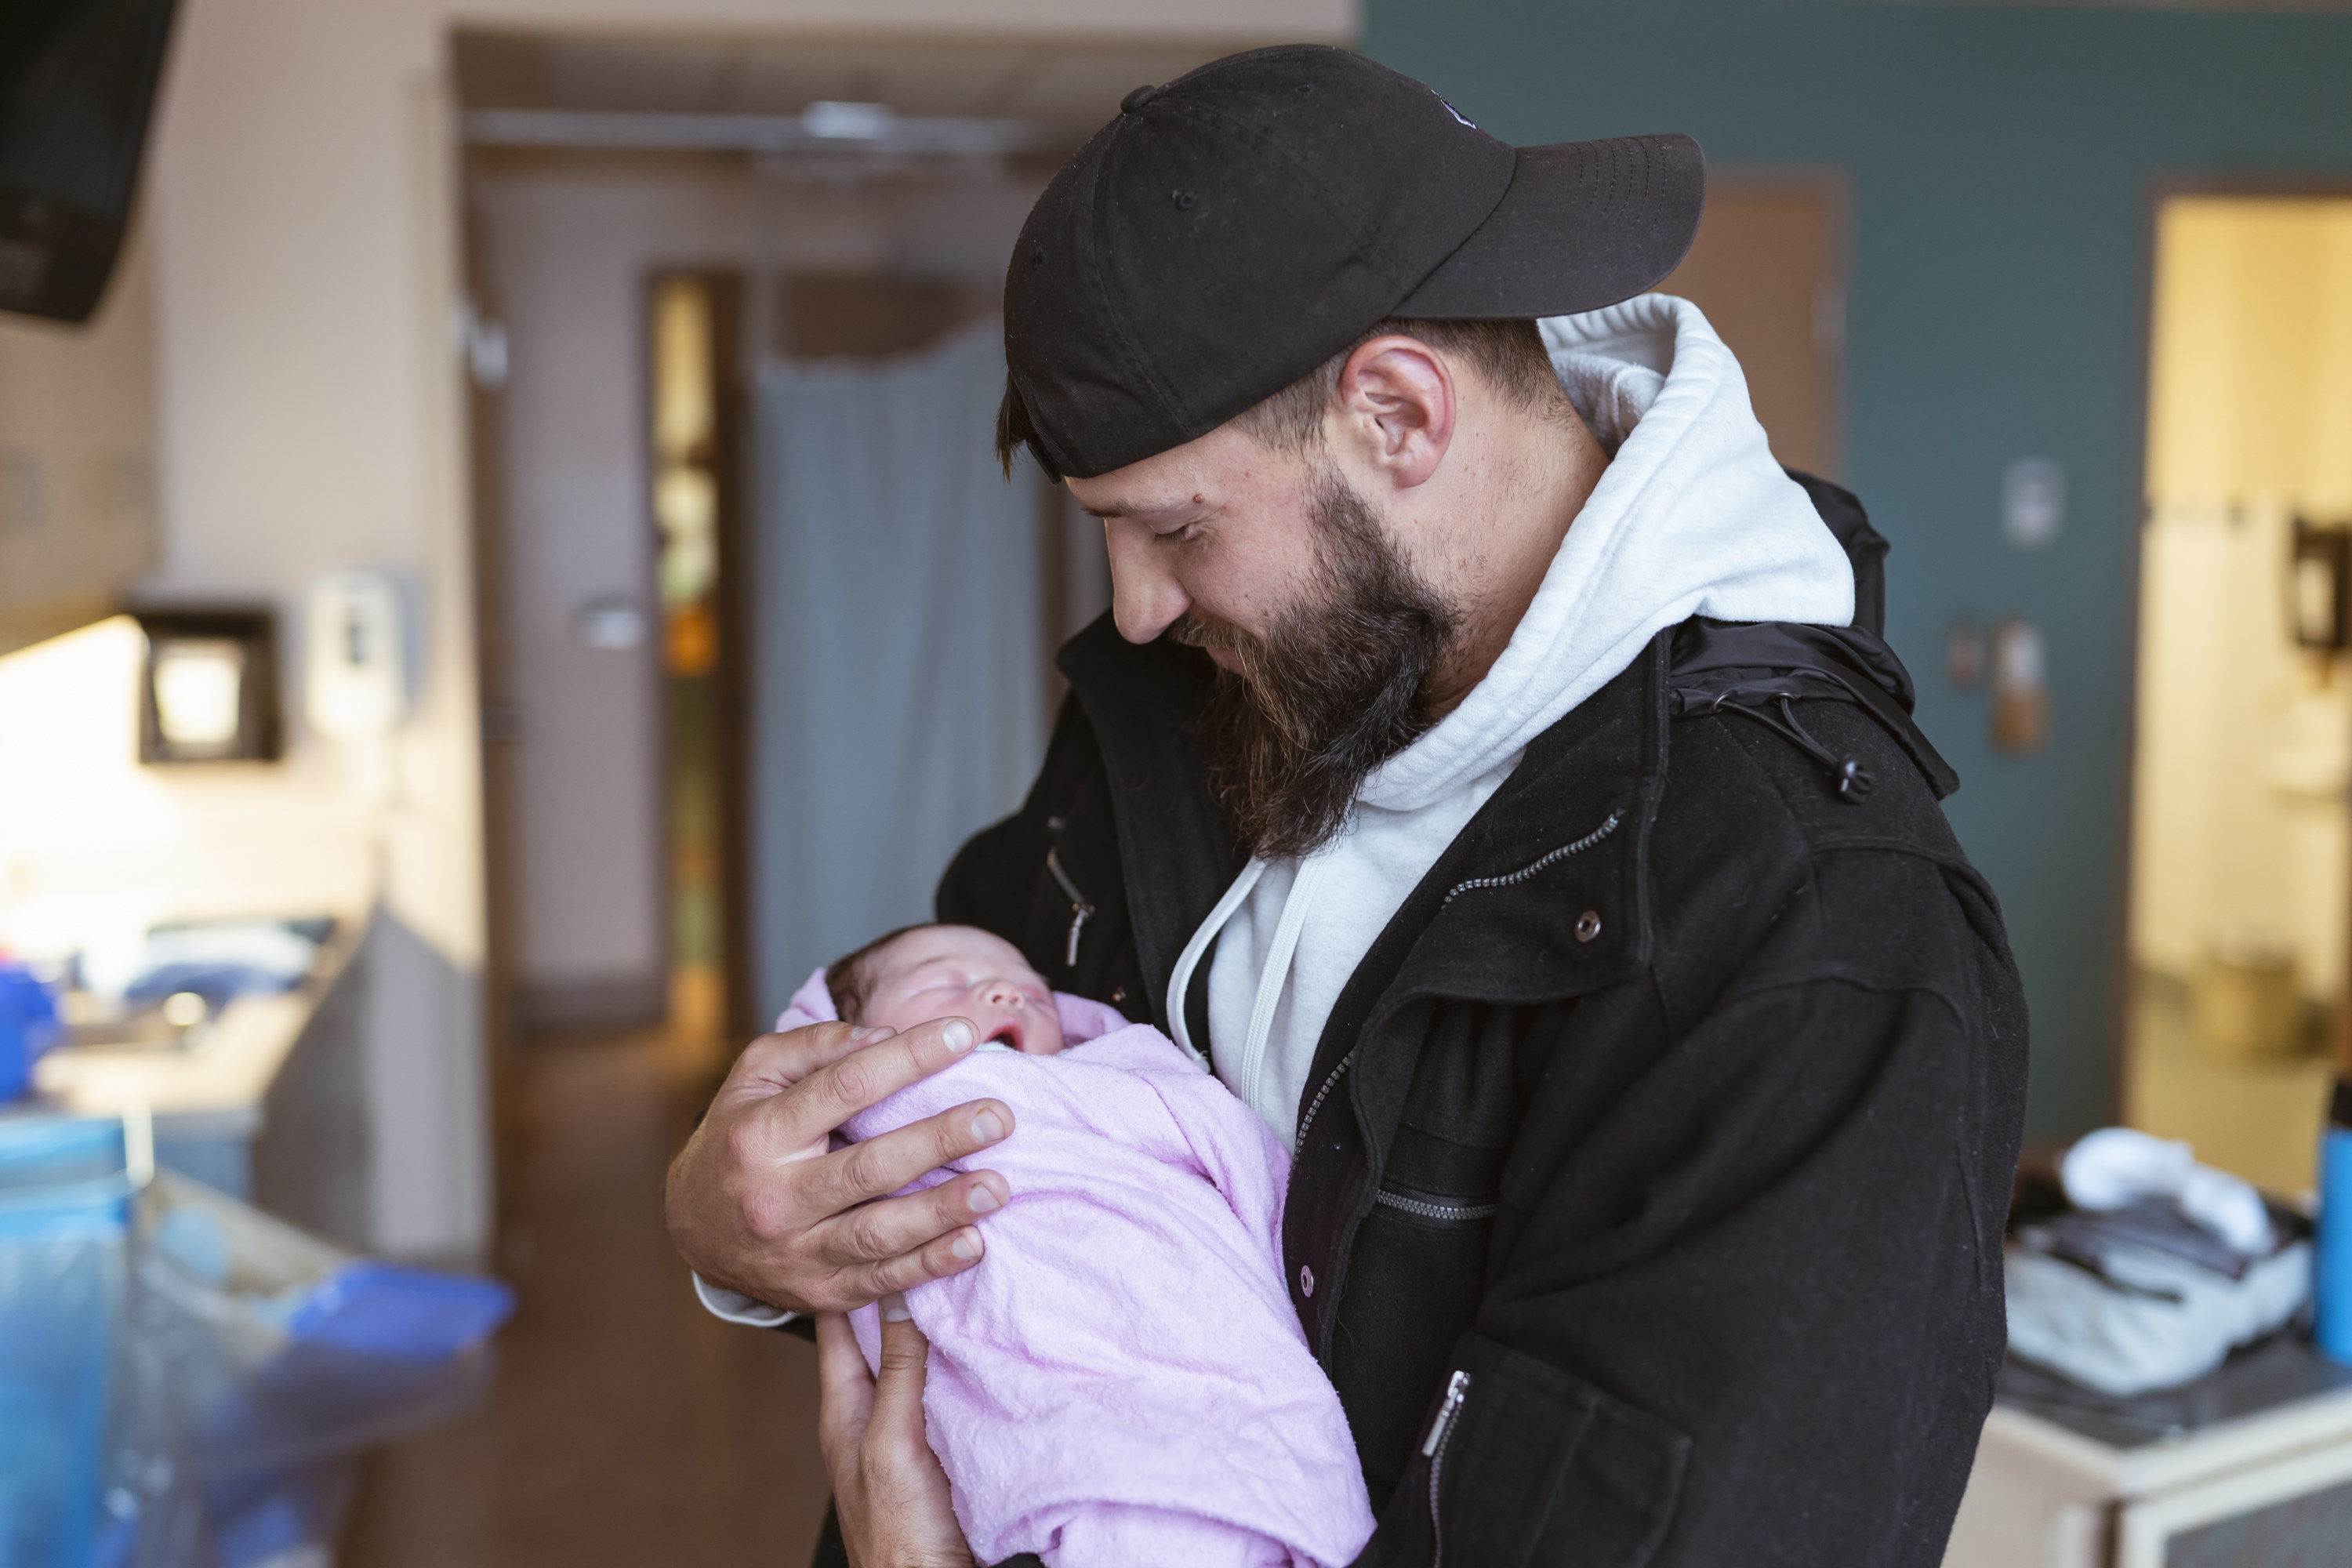 A man wearing a black hat and jacket holding a newborn baby